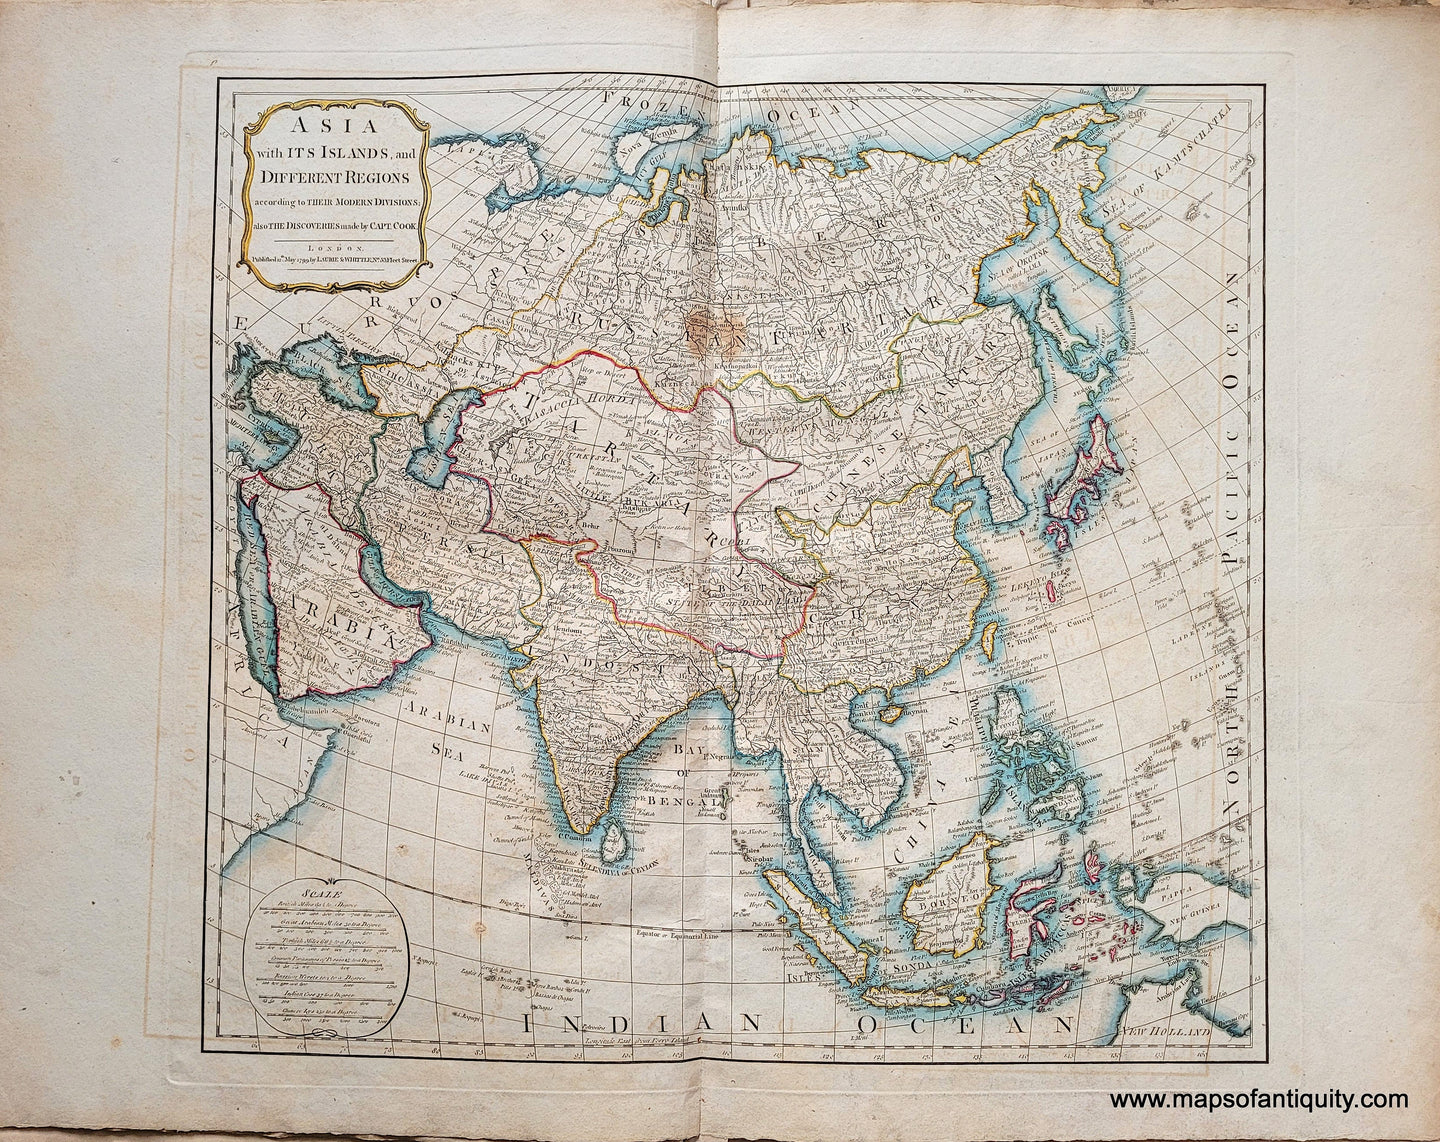 Genuine-Antique-Map-Asia-with-its-Islands-and-Different-Regions-according-to-their-Modern-Divisions-also-the-Discoveries-made-by-Capt-Cook-1799-Laurie-and-Whittle-Maps-Of-Antiquity